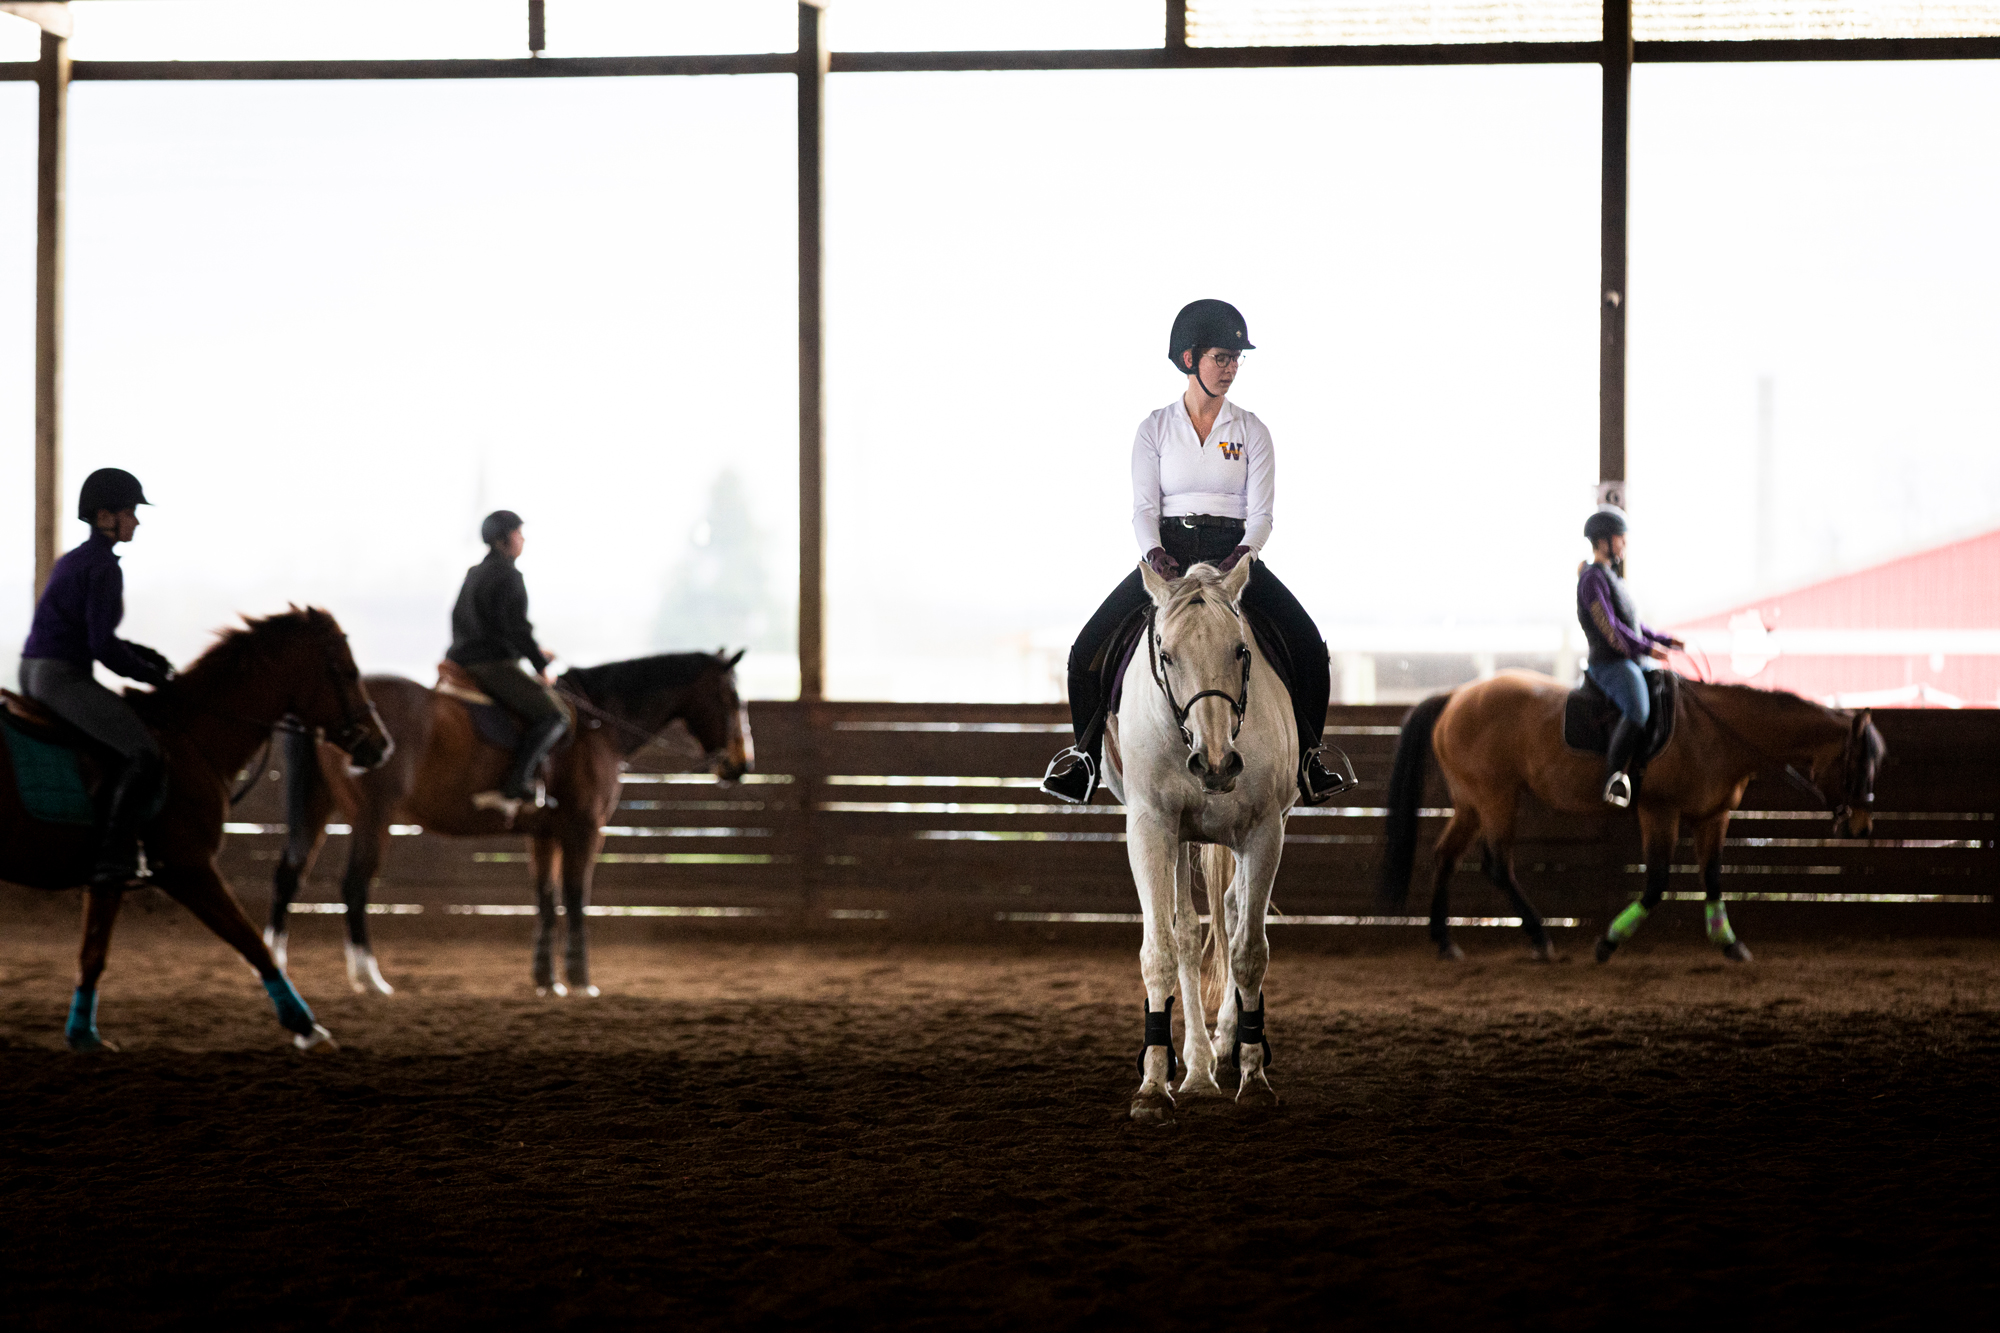 A woman in a UW jacket rides a white horse in a covered barn. Others ride brown horses around her.